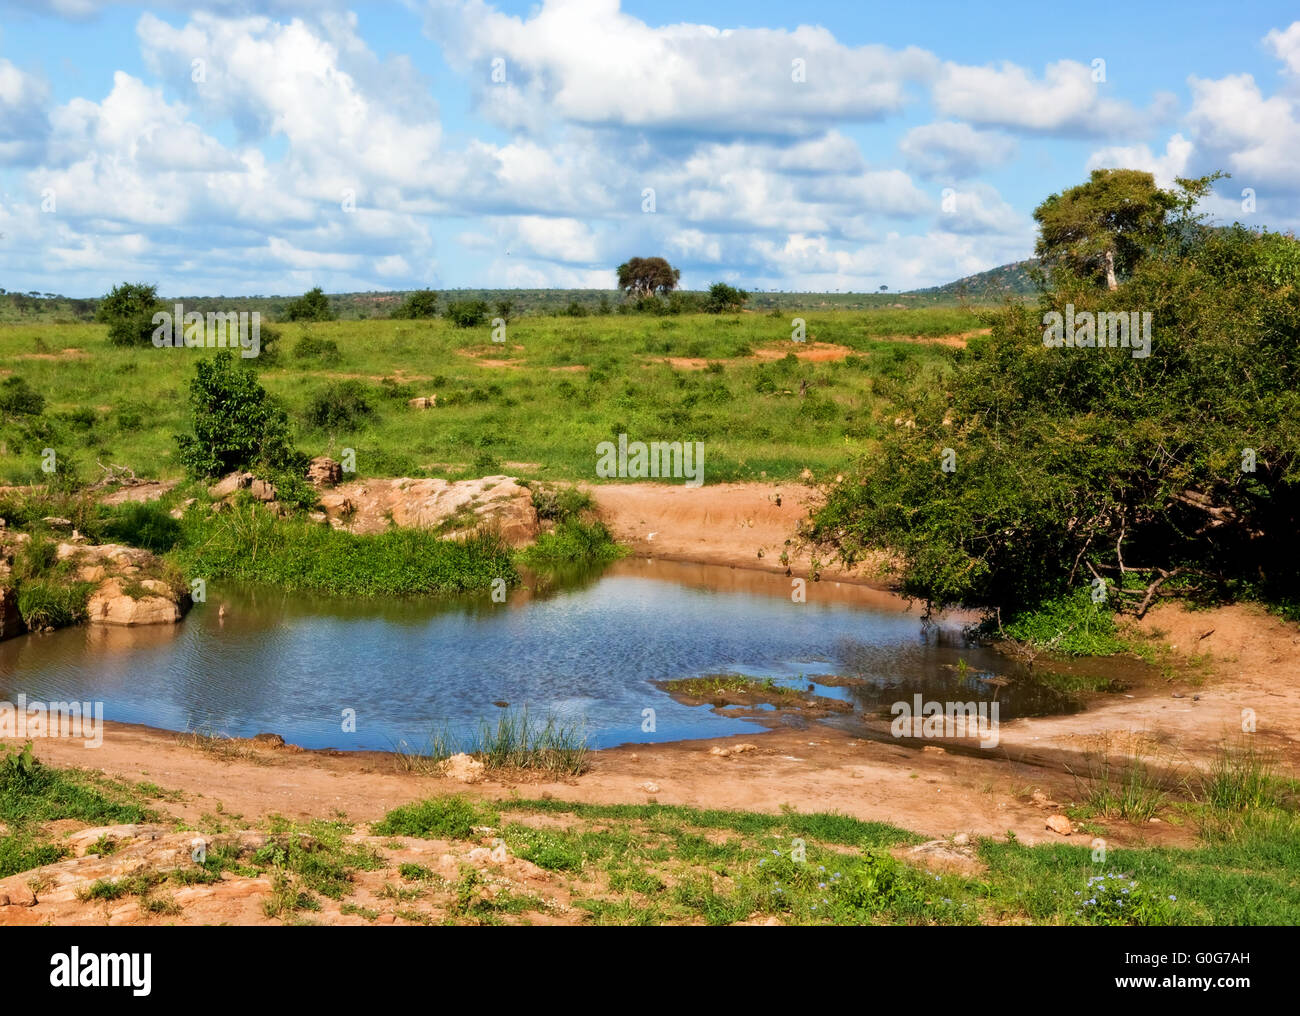 Pond of clear water in bush on savanna in Africa. Landscape of Tsavo West Stock Photo